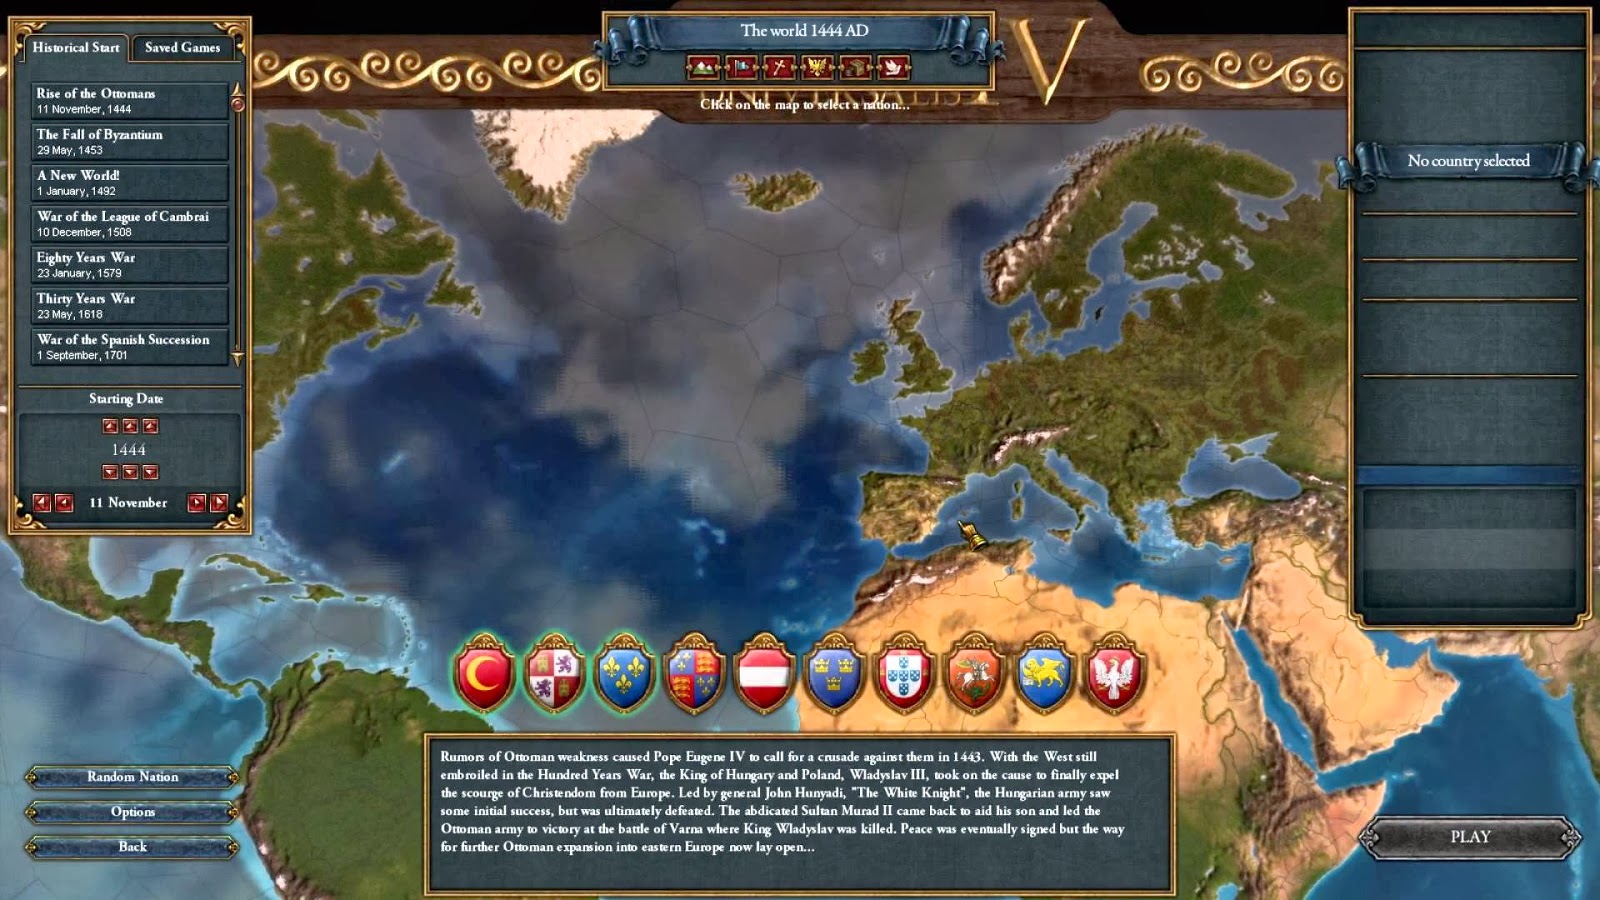 Europa Universalis 4 Patch Notes 1.3